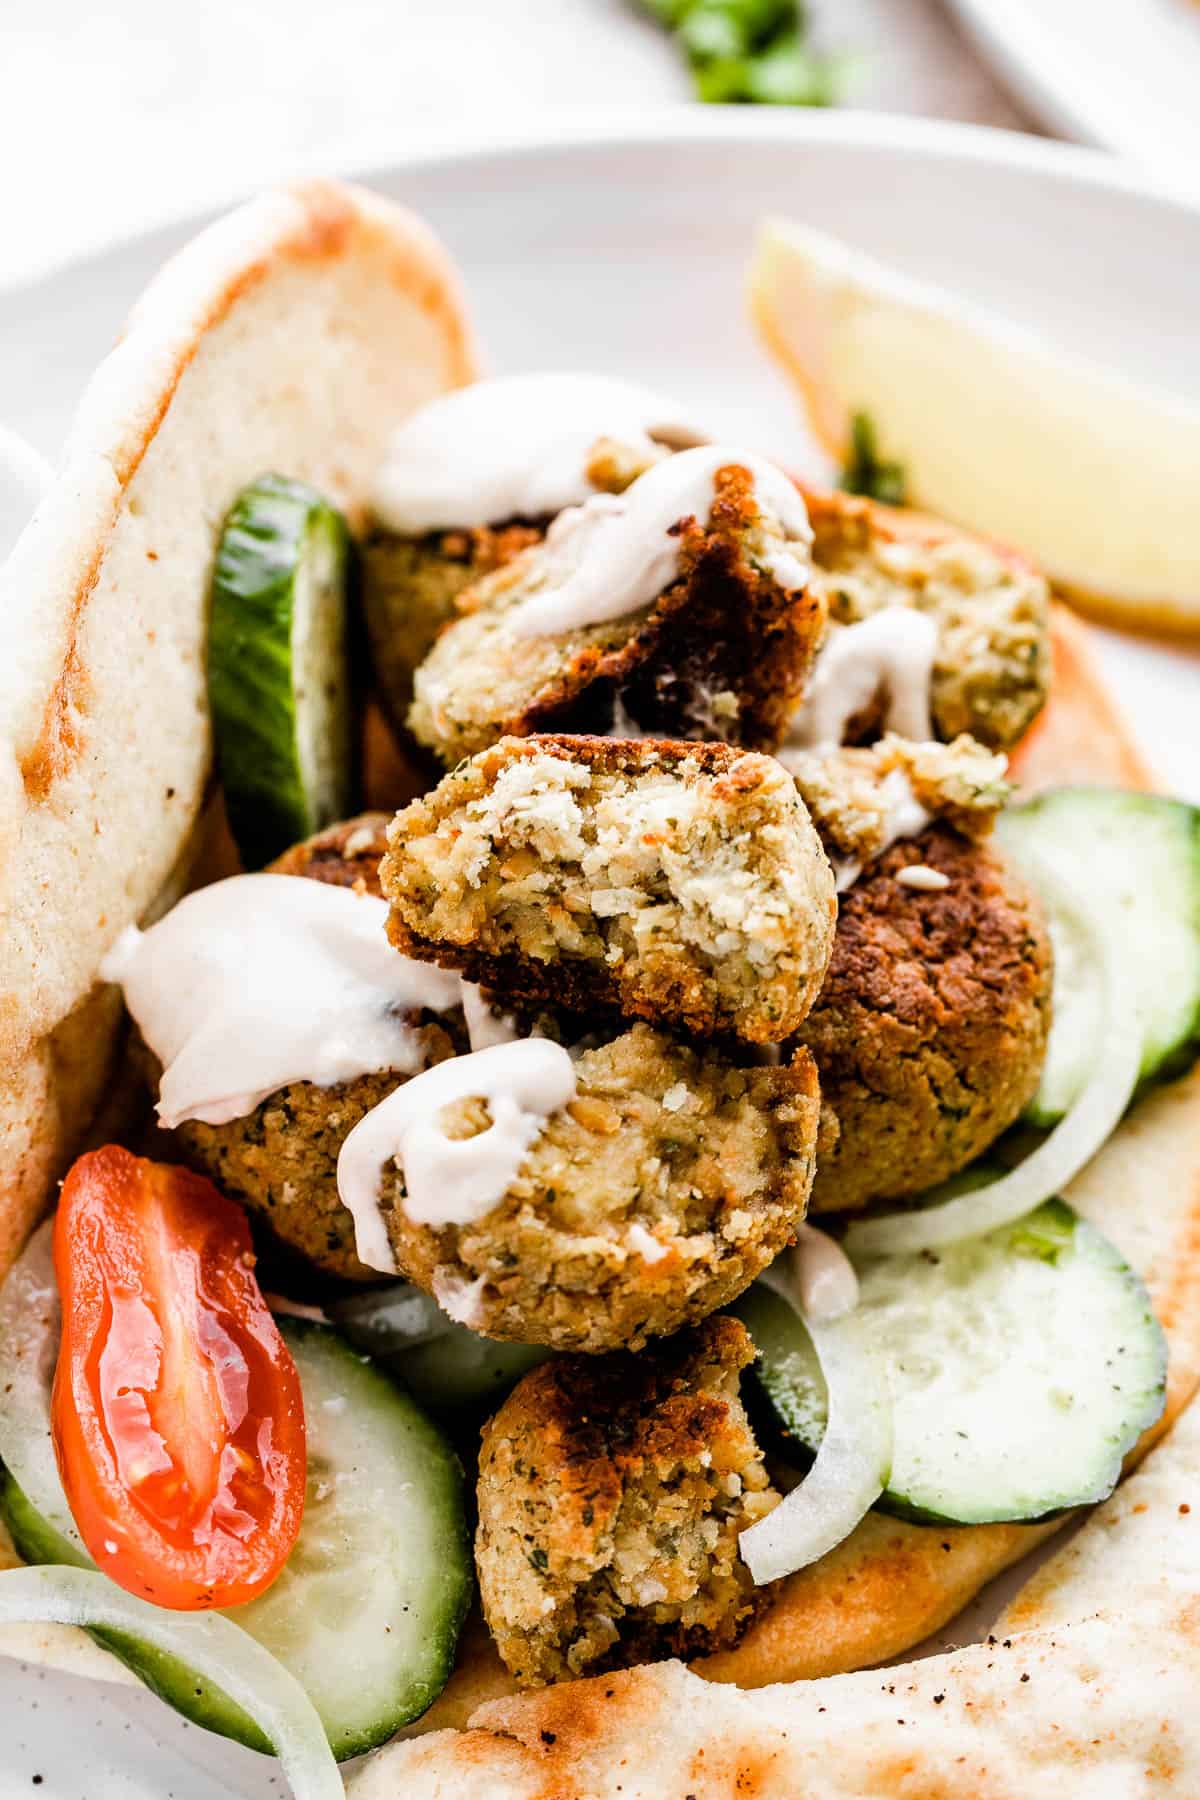 pita bread stuffed with cucumber slices, cherry tomatoes, and falafel